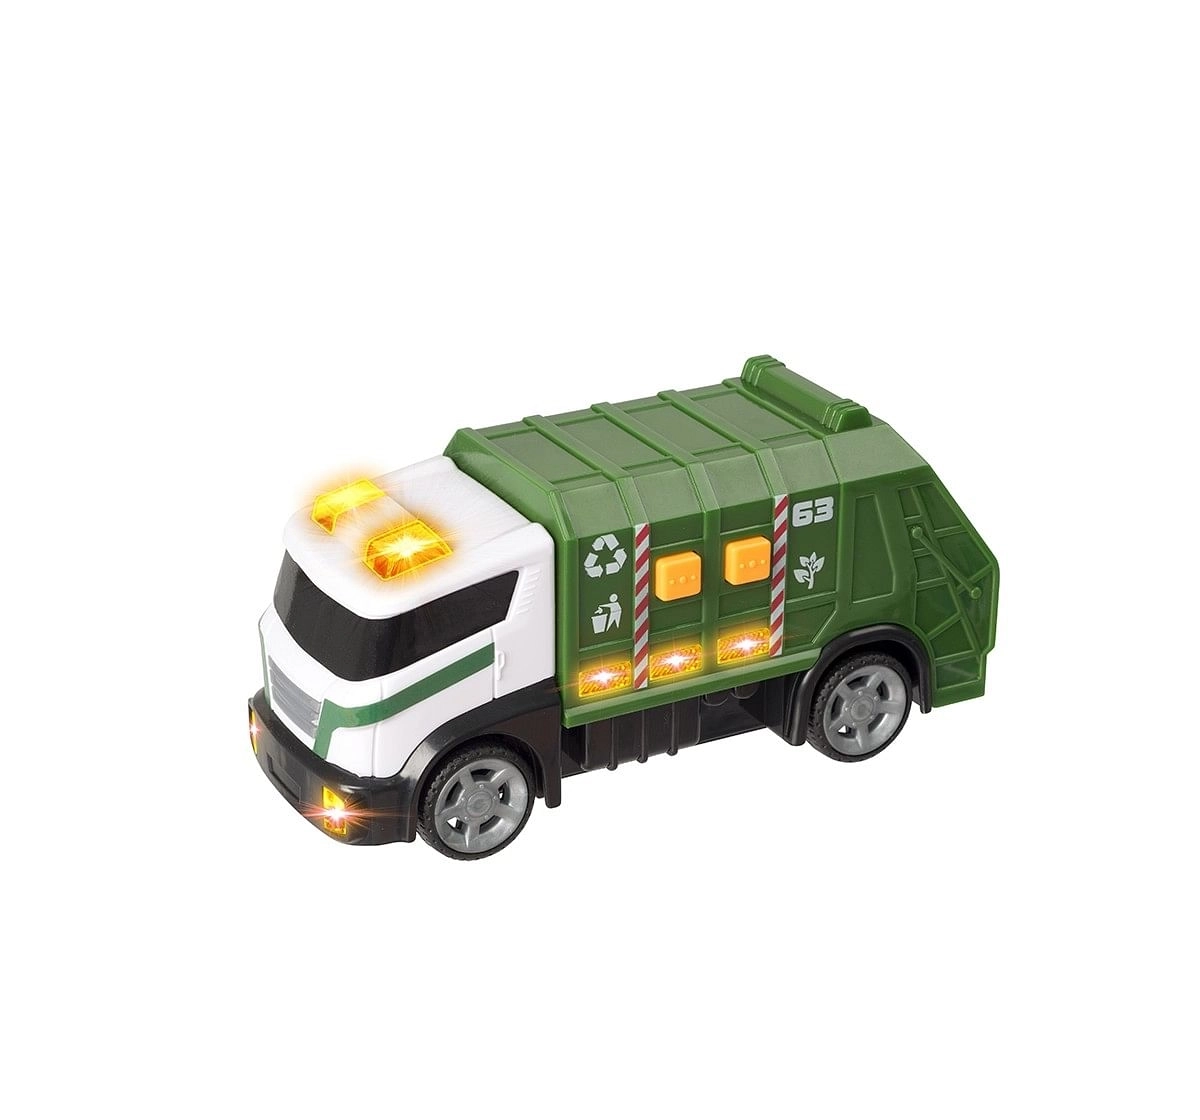 Ralleyz Light And Sound Garbage Truck Small Vehicles for Kids age 3Y+ 